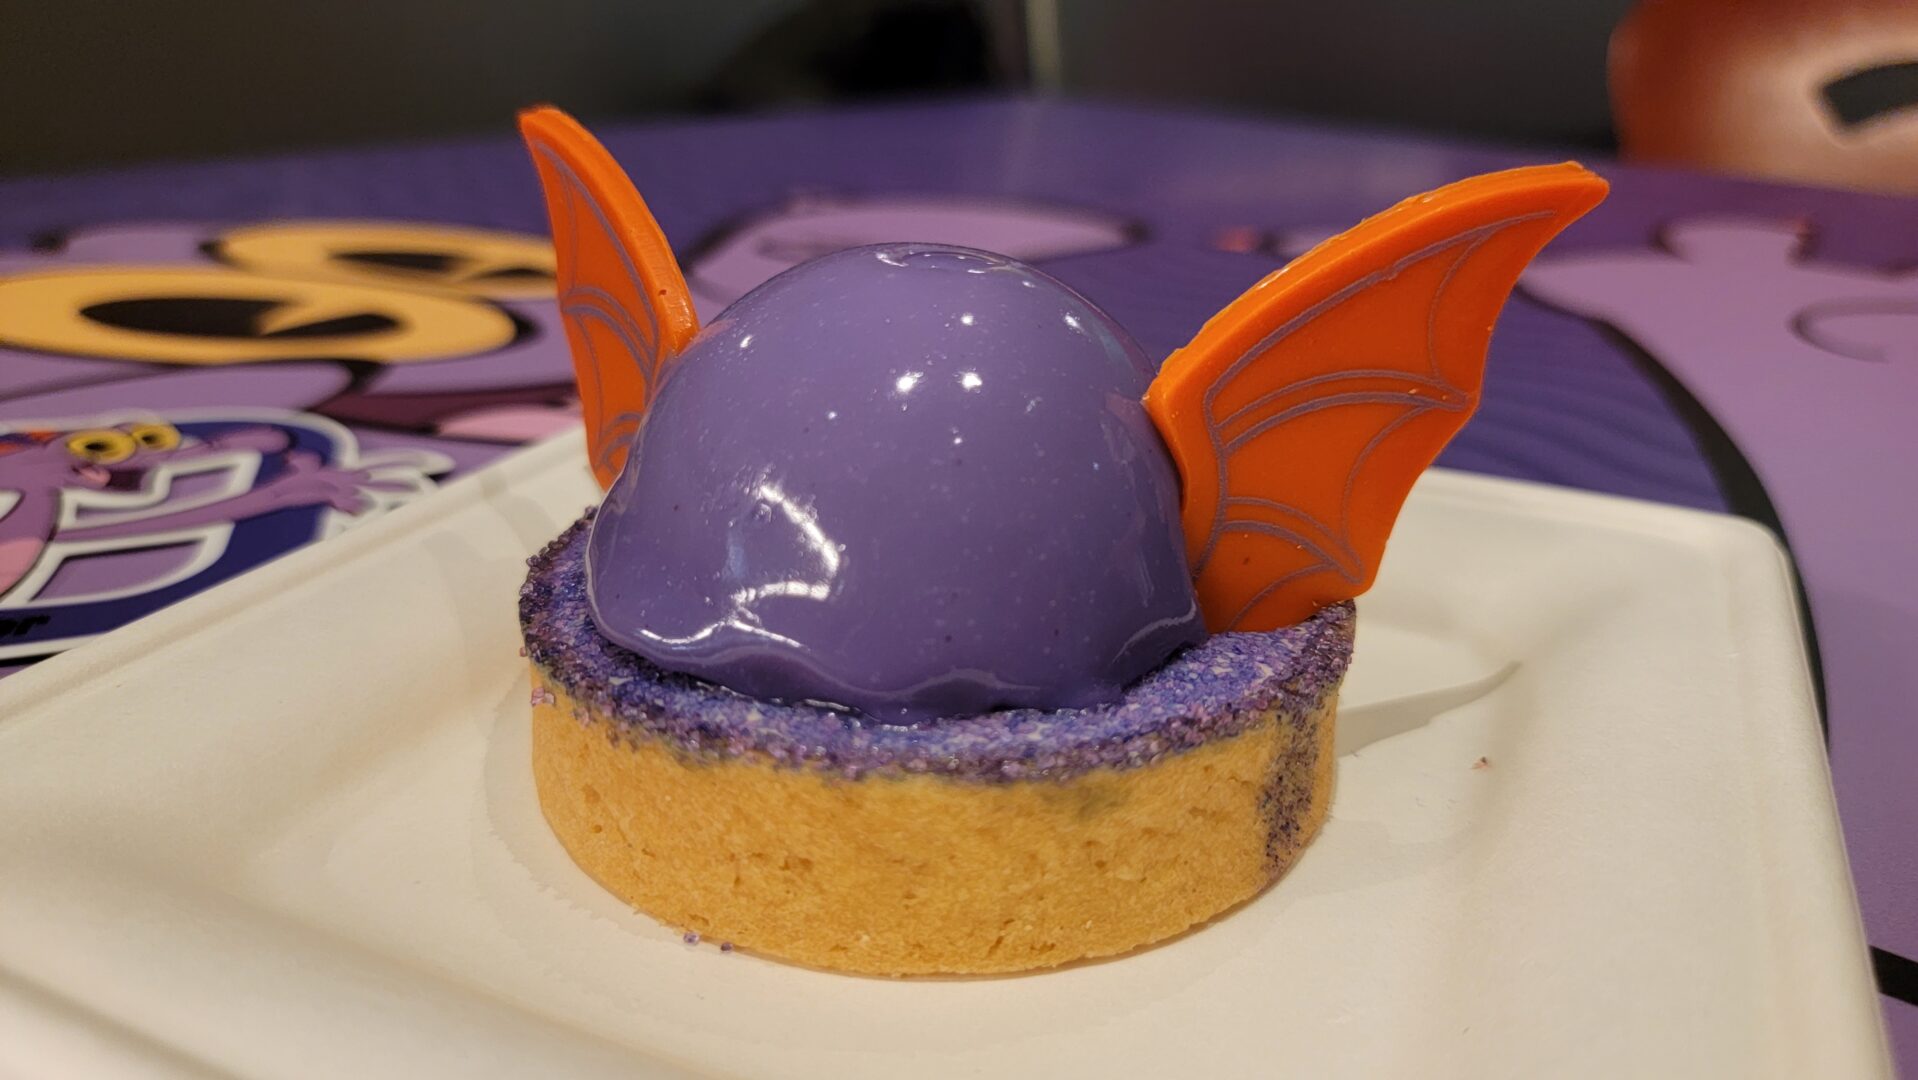 Super Cute Figment Raspberry “Lemonade” Tart is a Delectable Treat in EPCOT